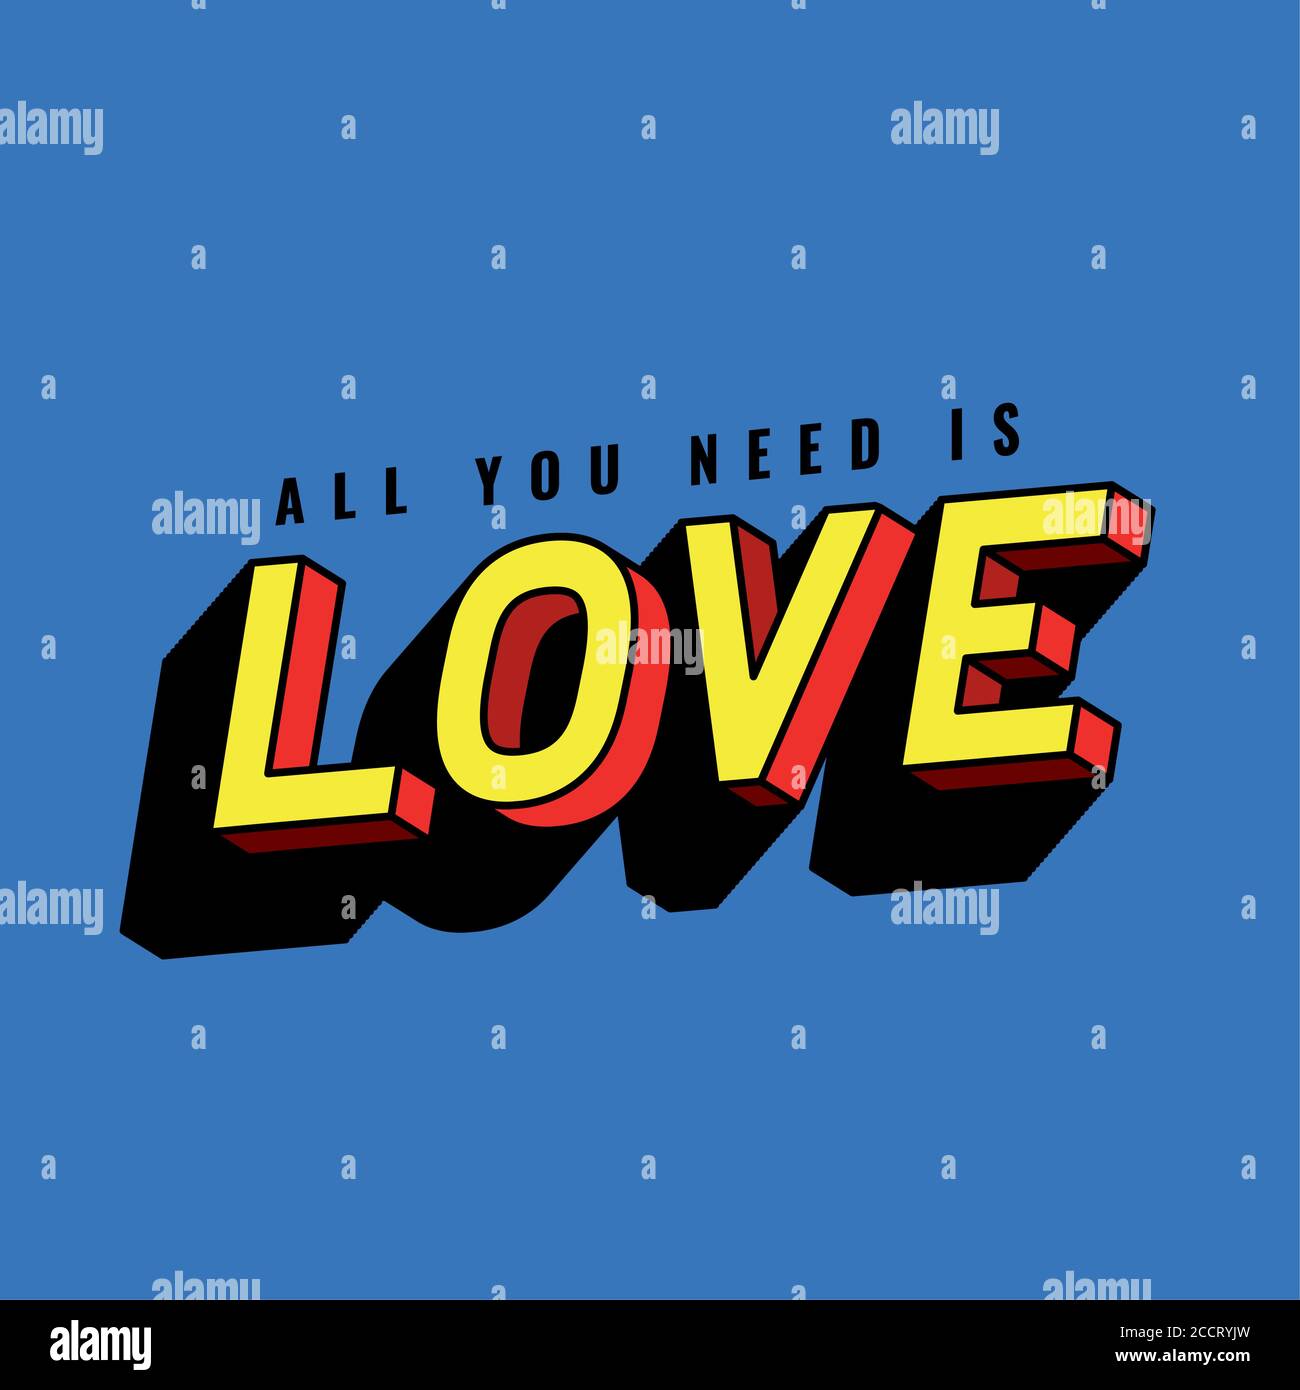 All You Need Is Love Lettering On Blue Background Design Typography Retro And Comic Theme Vector Illustration Stock Vector Image Art Alamy